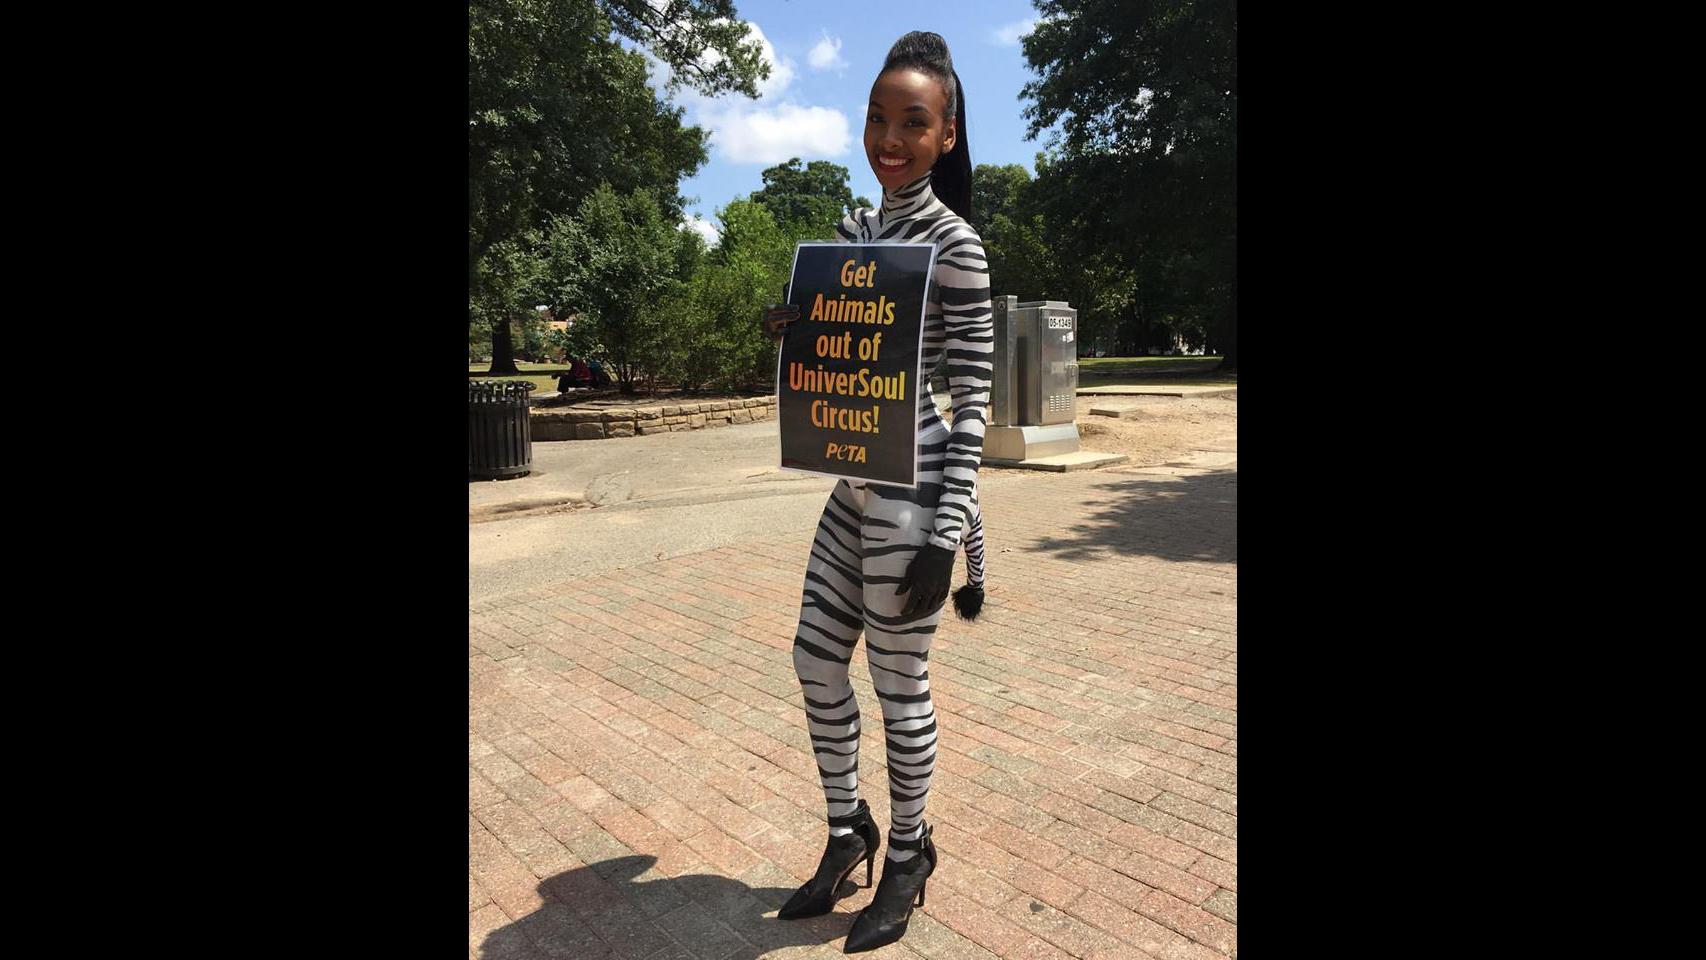 PETA supporter Nikki Ford during a recent protest of UniverSoul Circus in Raleigh, N.C. (Courtesy PETA)